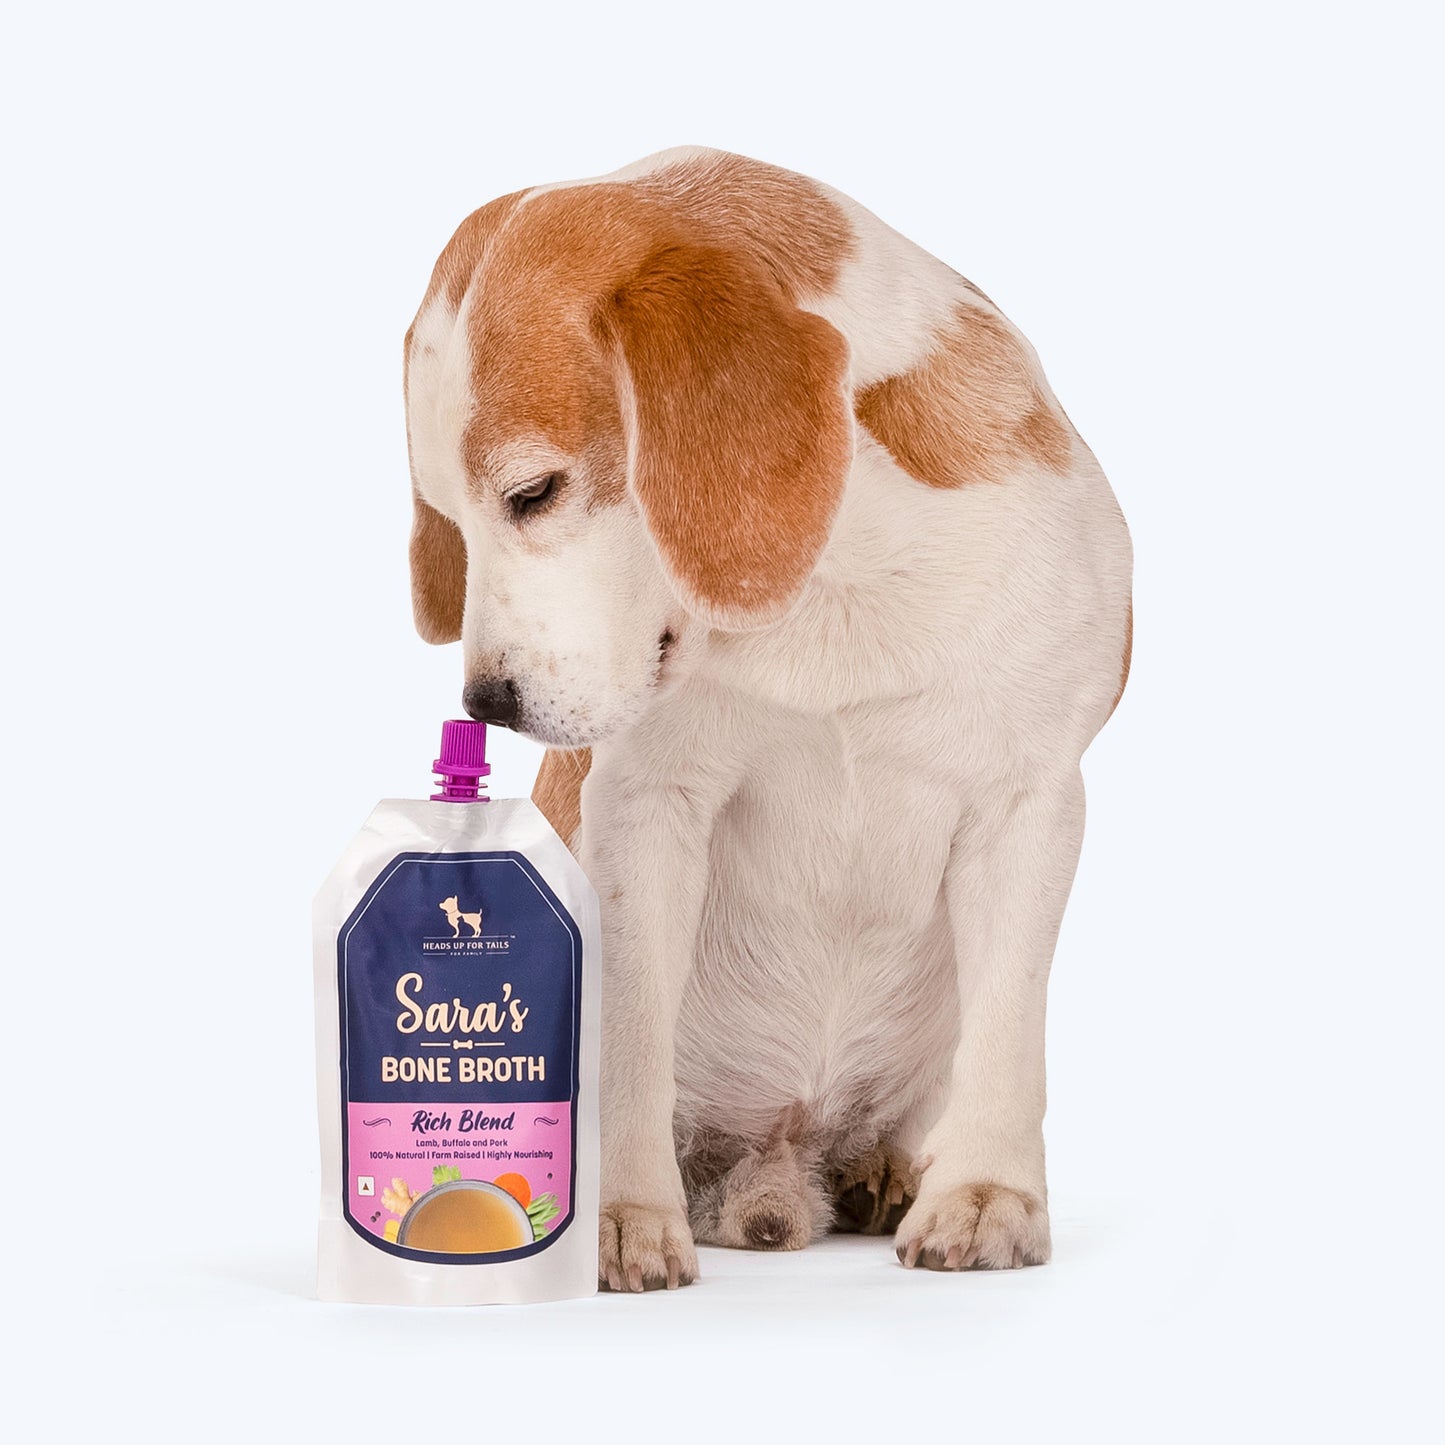 HUFT Sara's Rich Blend Bone Broth For Dogs - 150 ml - Heads Up For Tails